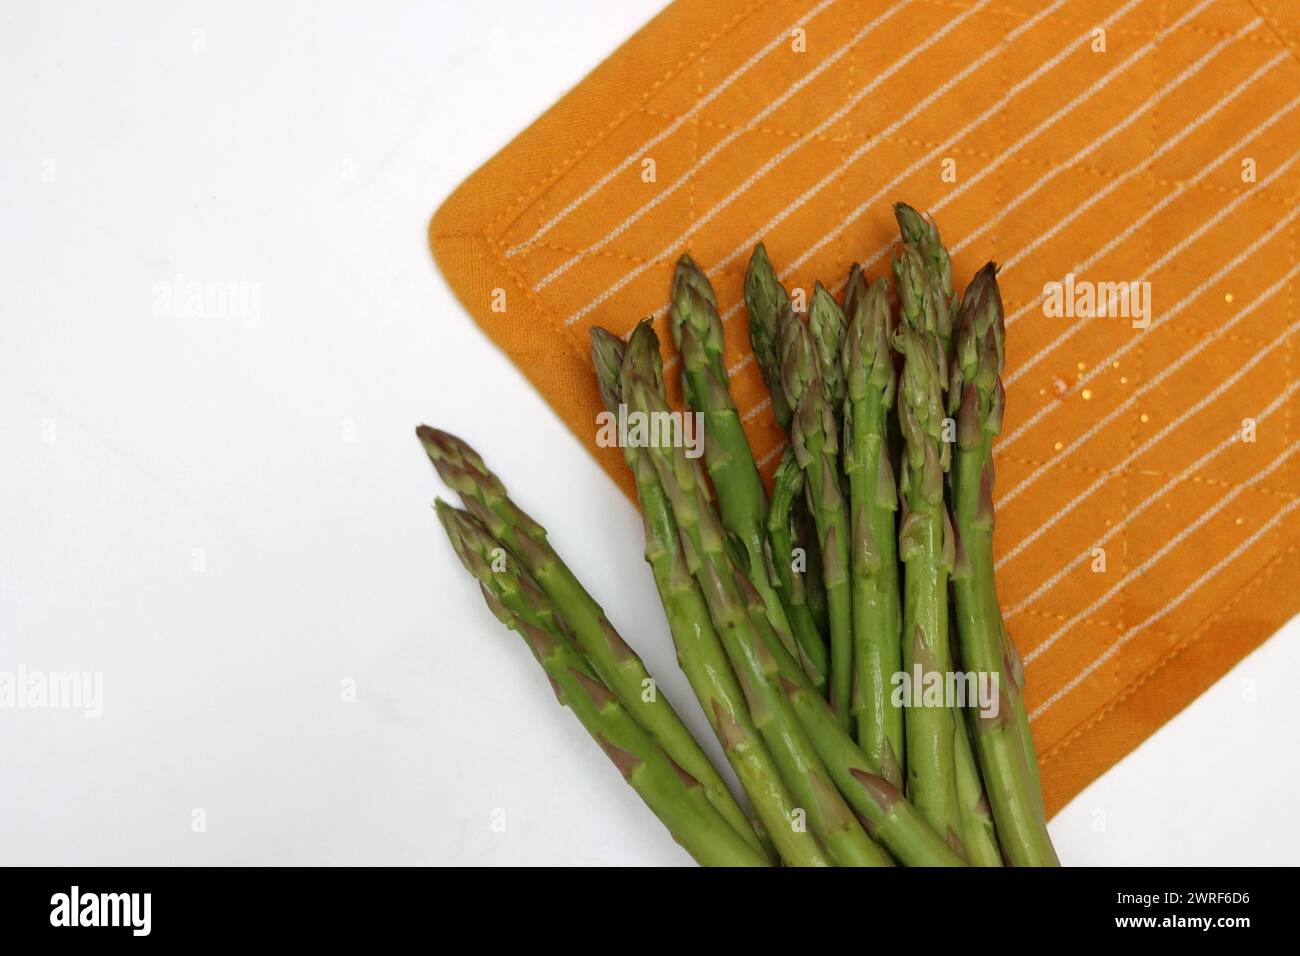 Still life photo with fresh asparagus on a table. Close up photo of fresh organic vegetables. Healthy eating balanced diet concept. Stock Photo